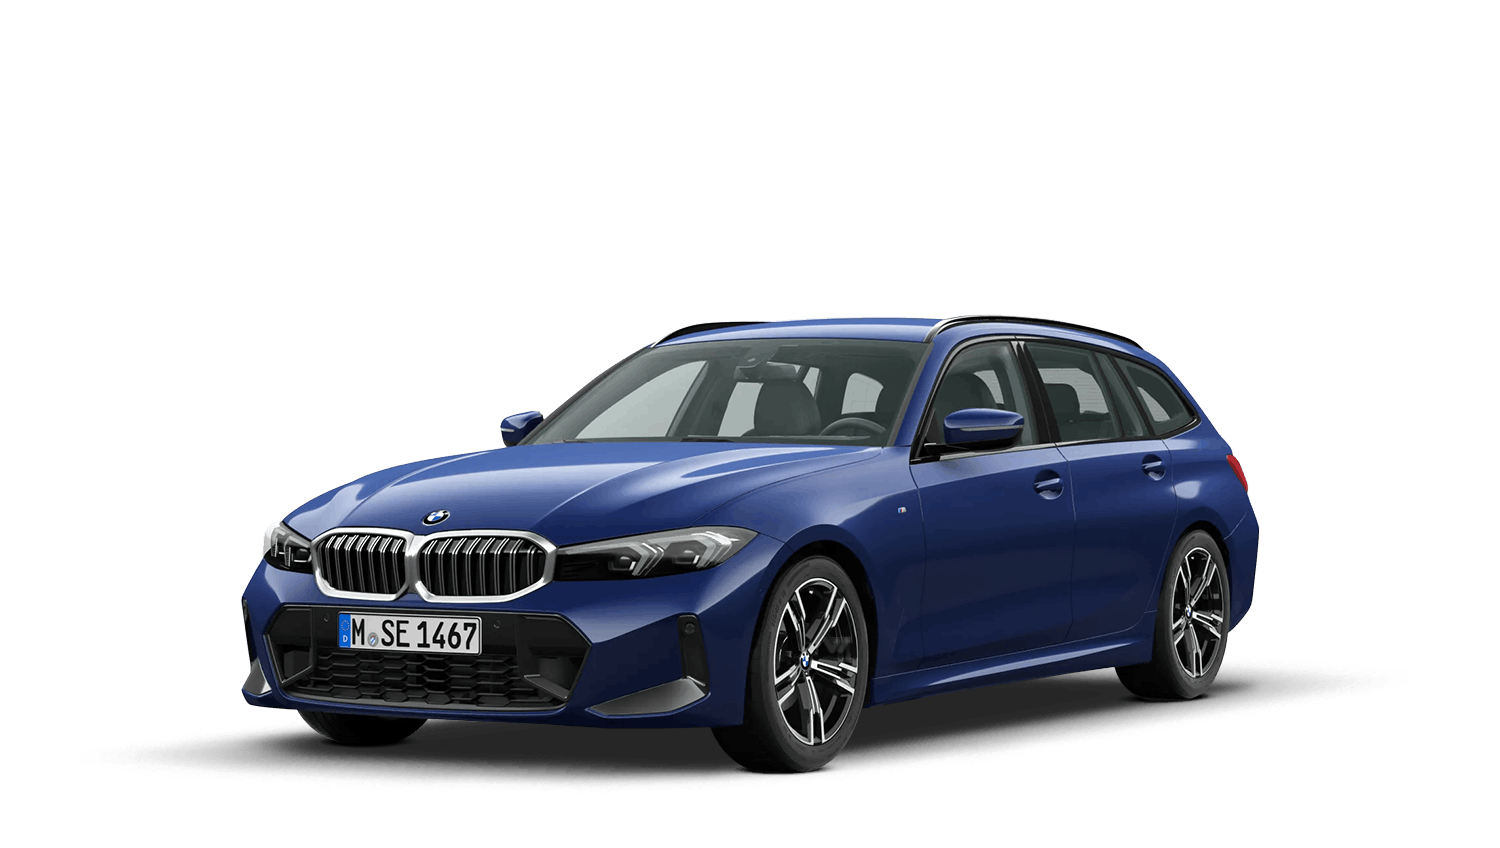 New 3 Series Touring